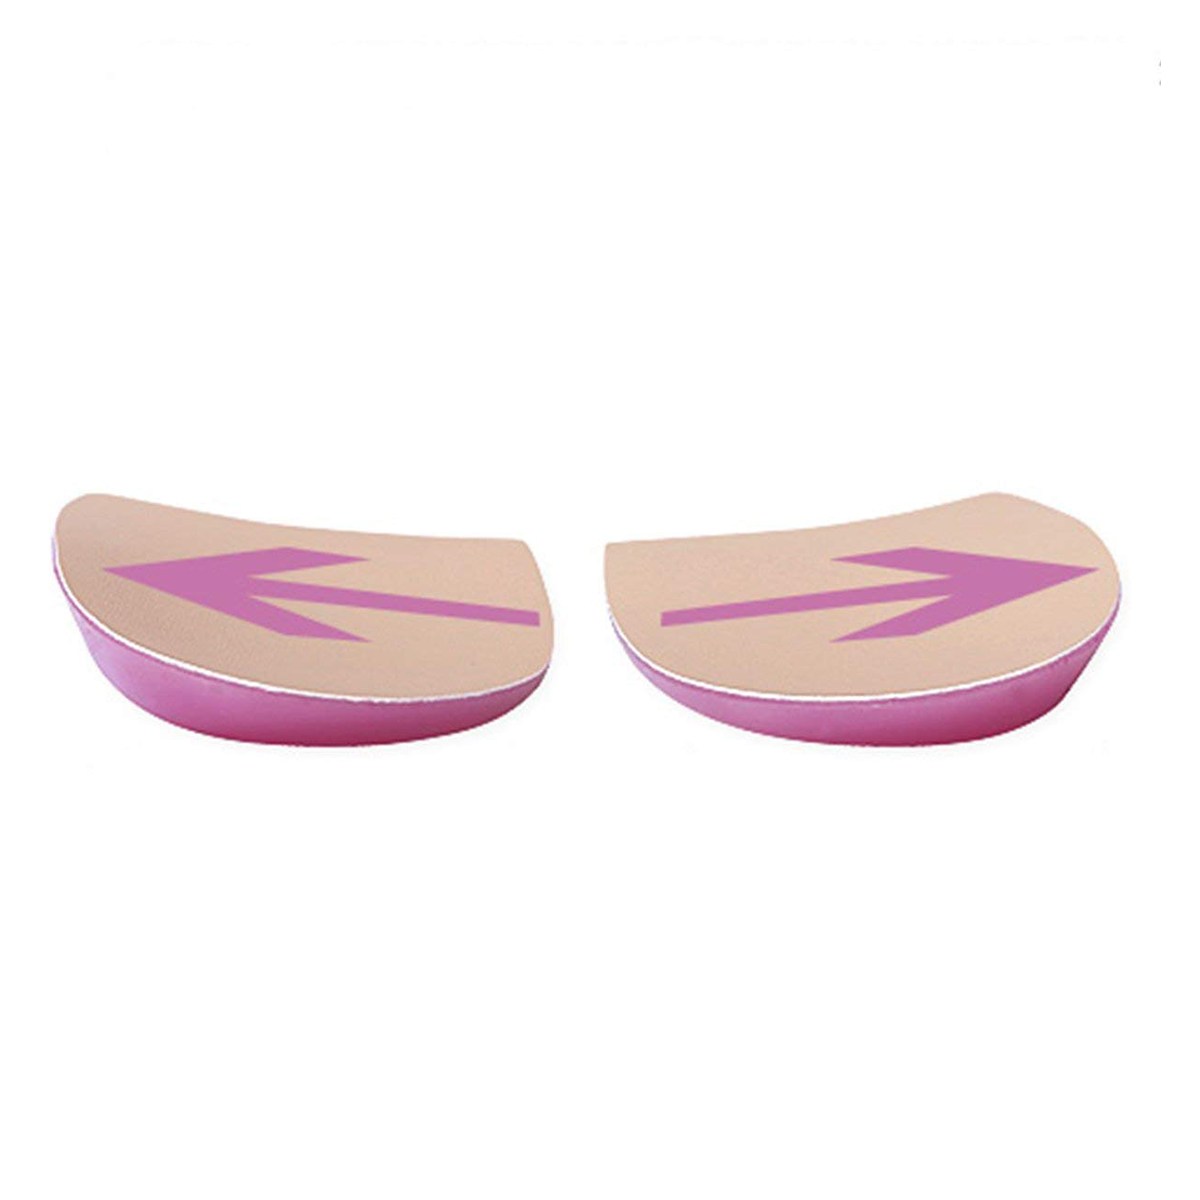 Medial and Lateral Heel Wedges with Silicone Gel Material